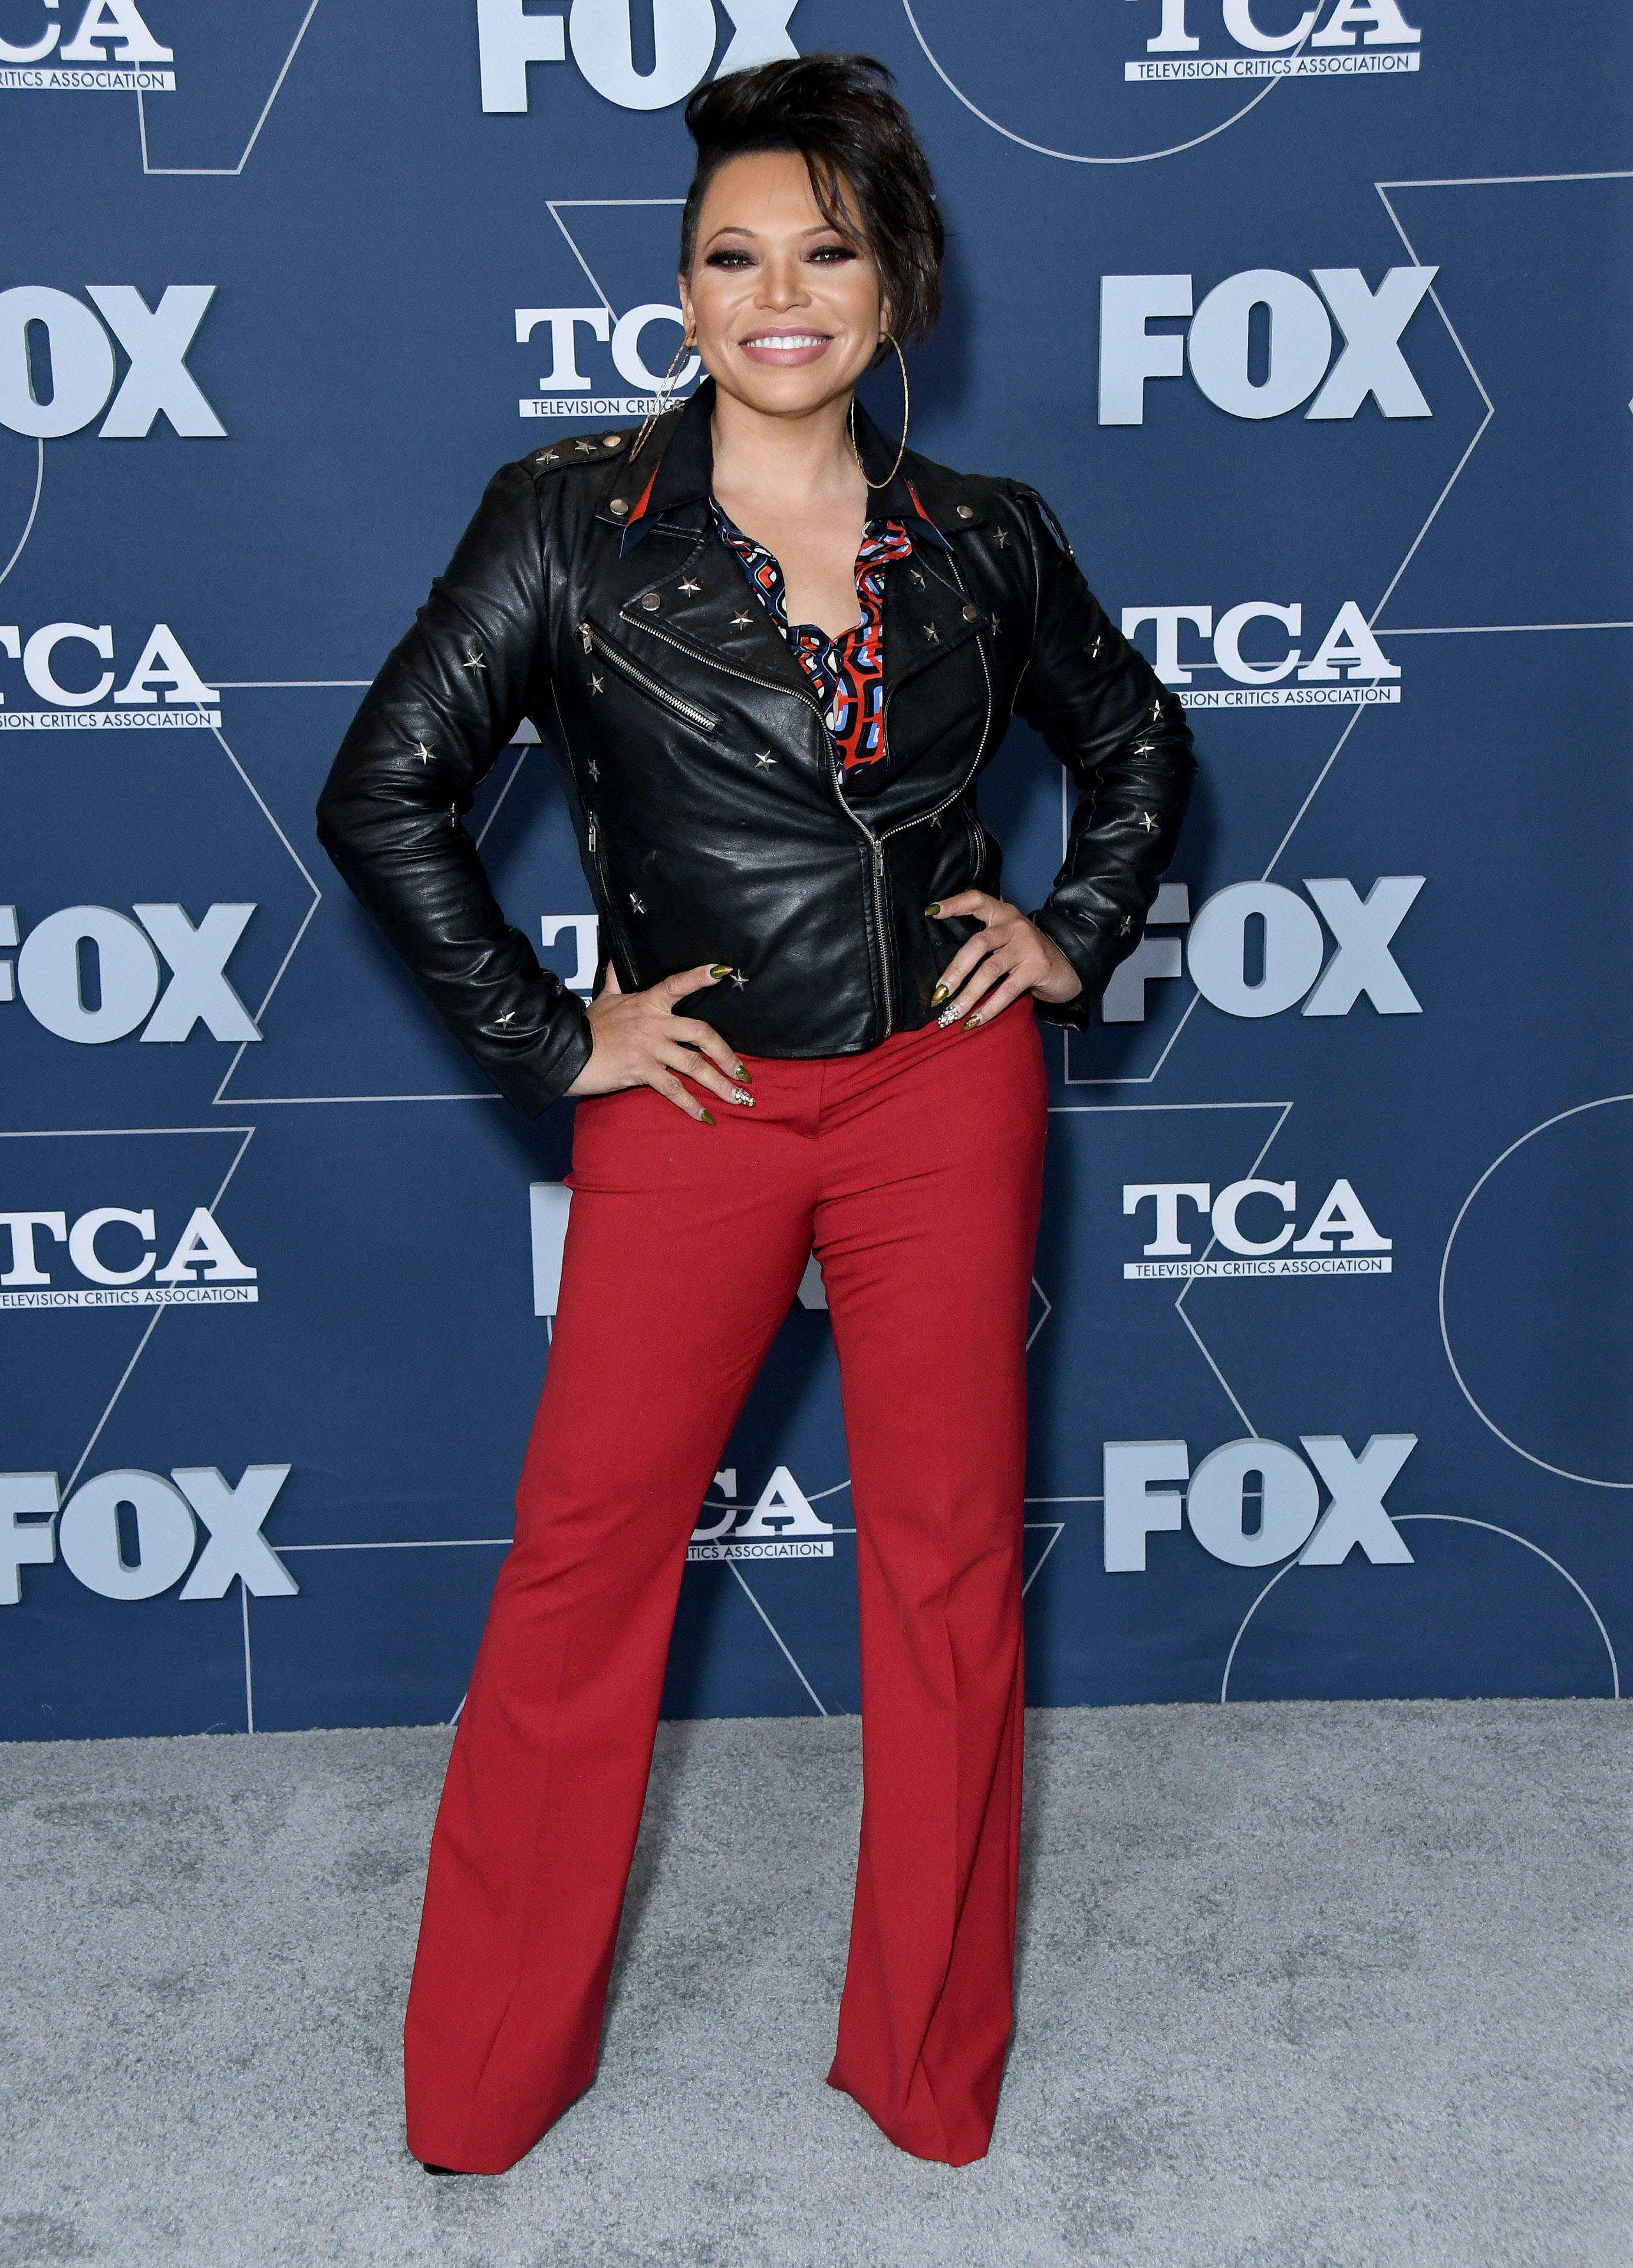 Tisha Campbell attends Fox Winter TCA All Star Party